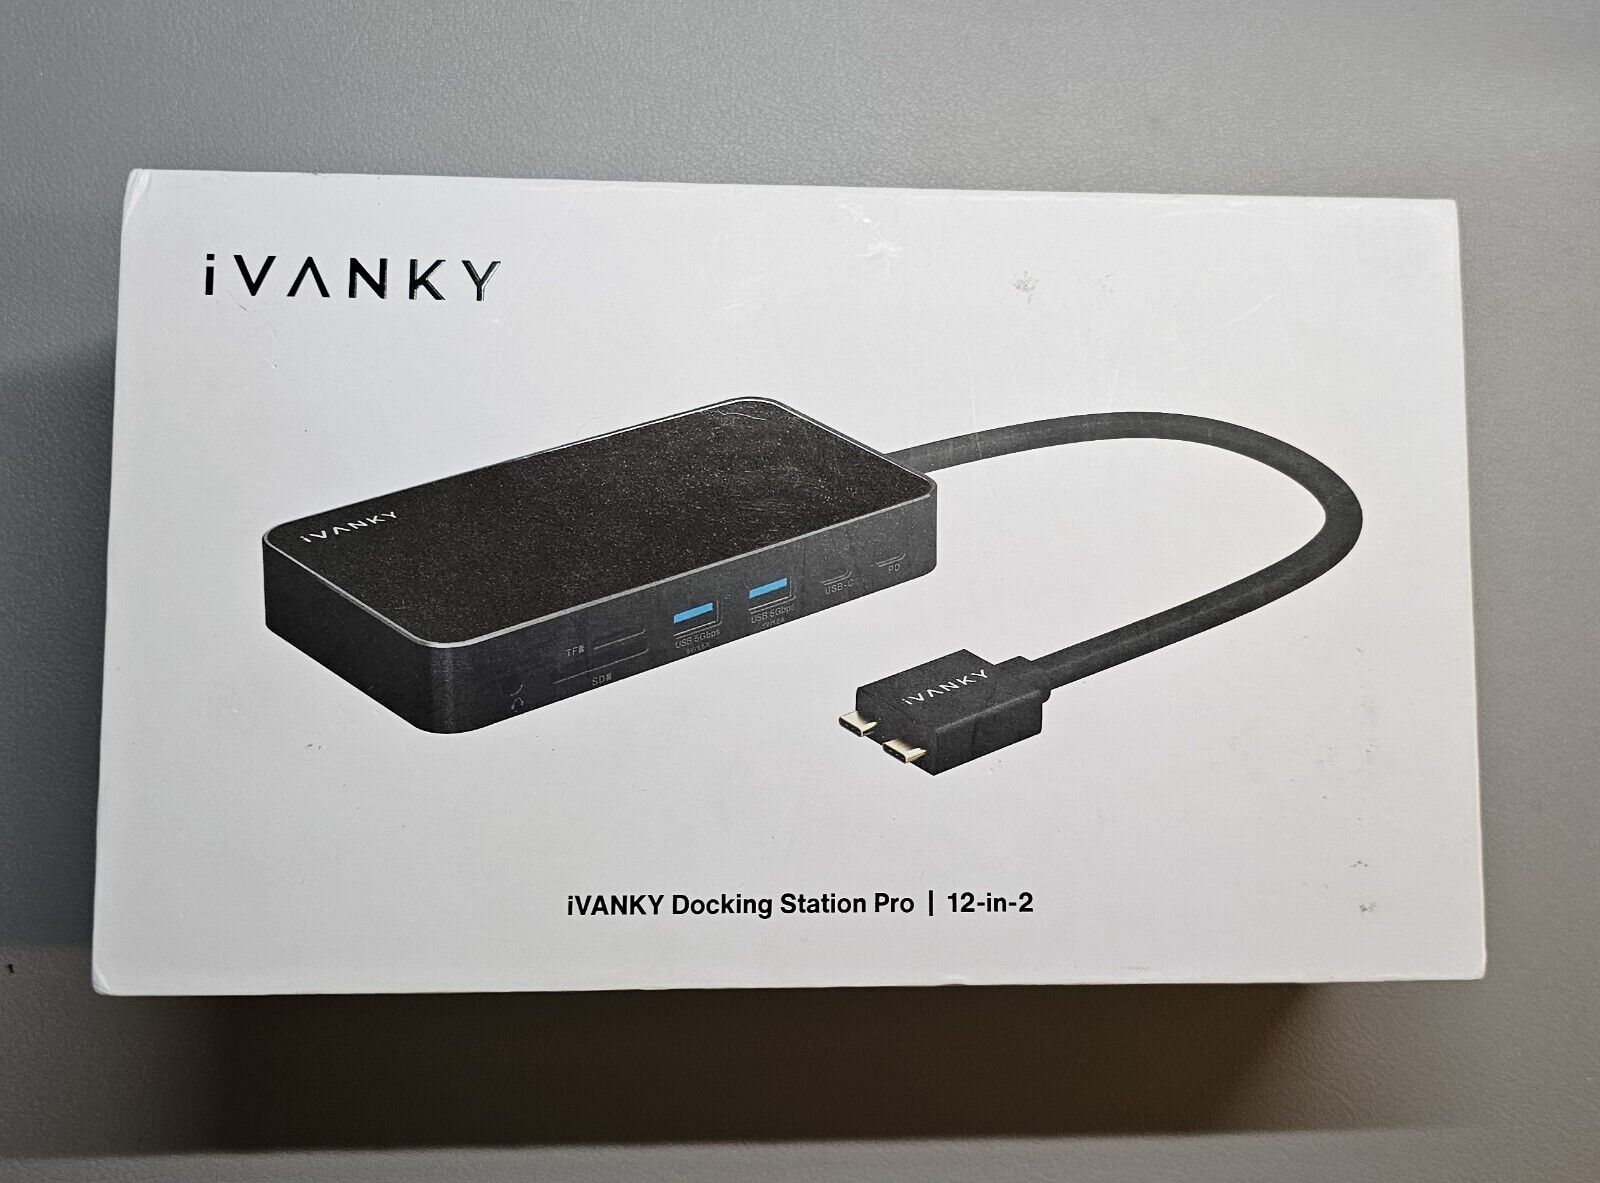 iVANKY FusionDock 1 MacBook Pro Docking Station without Power Adapter, 12-in-2